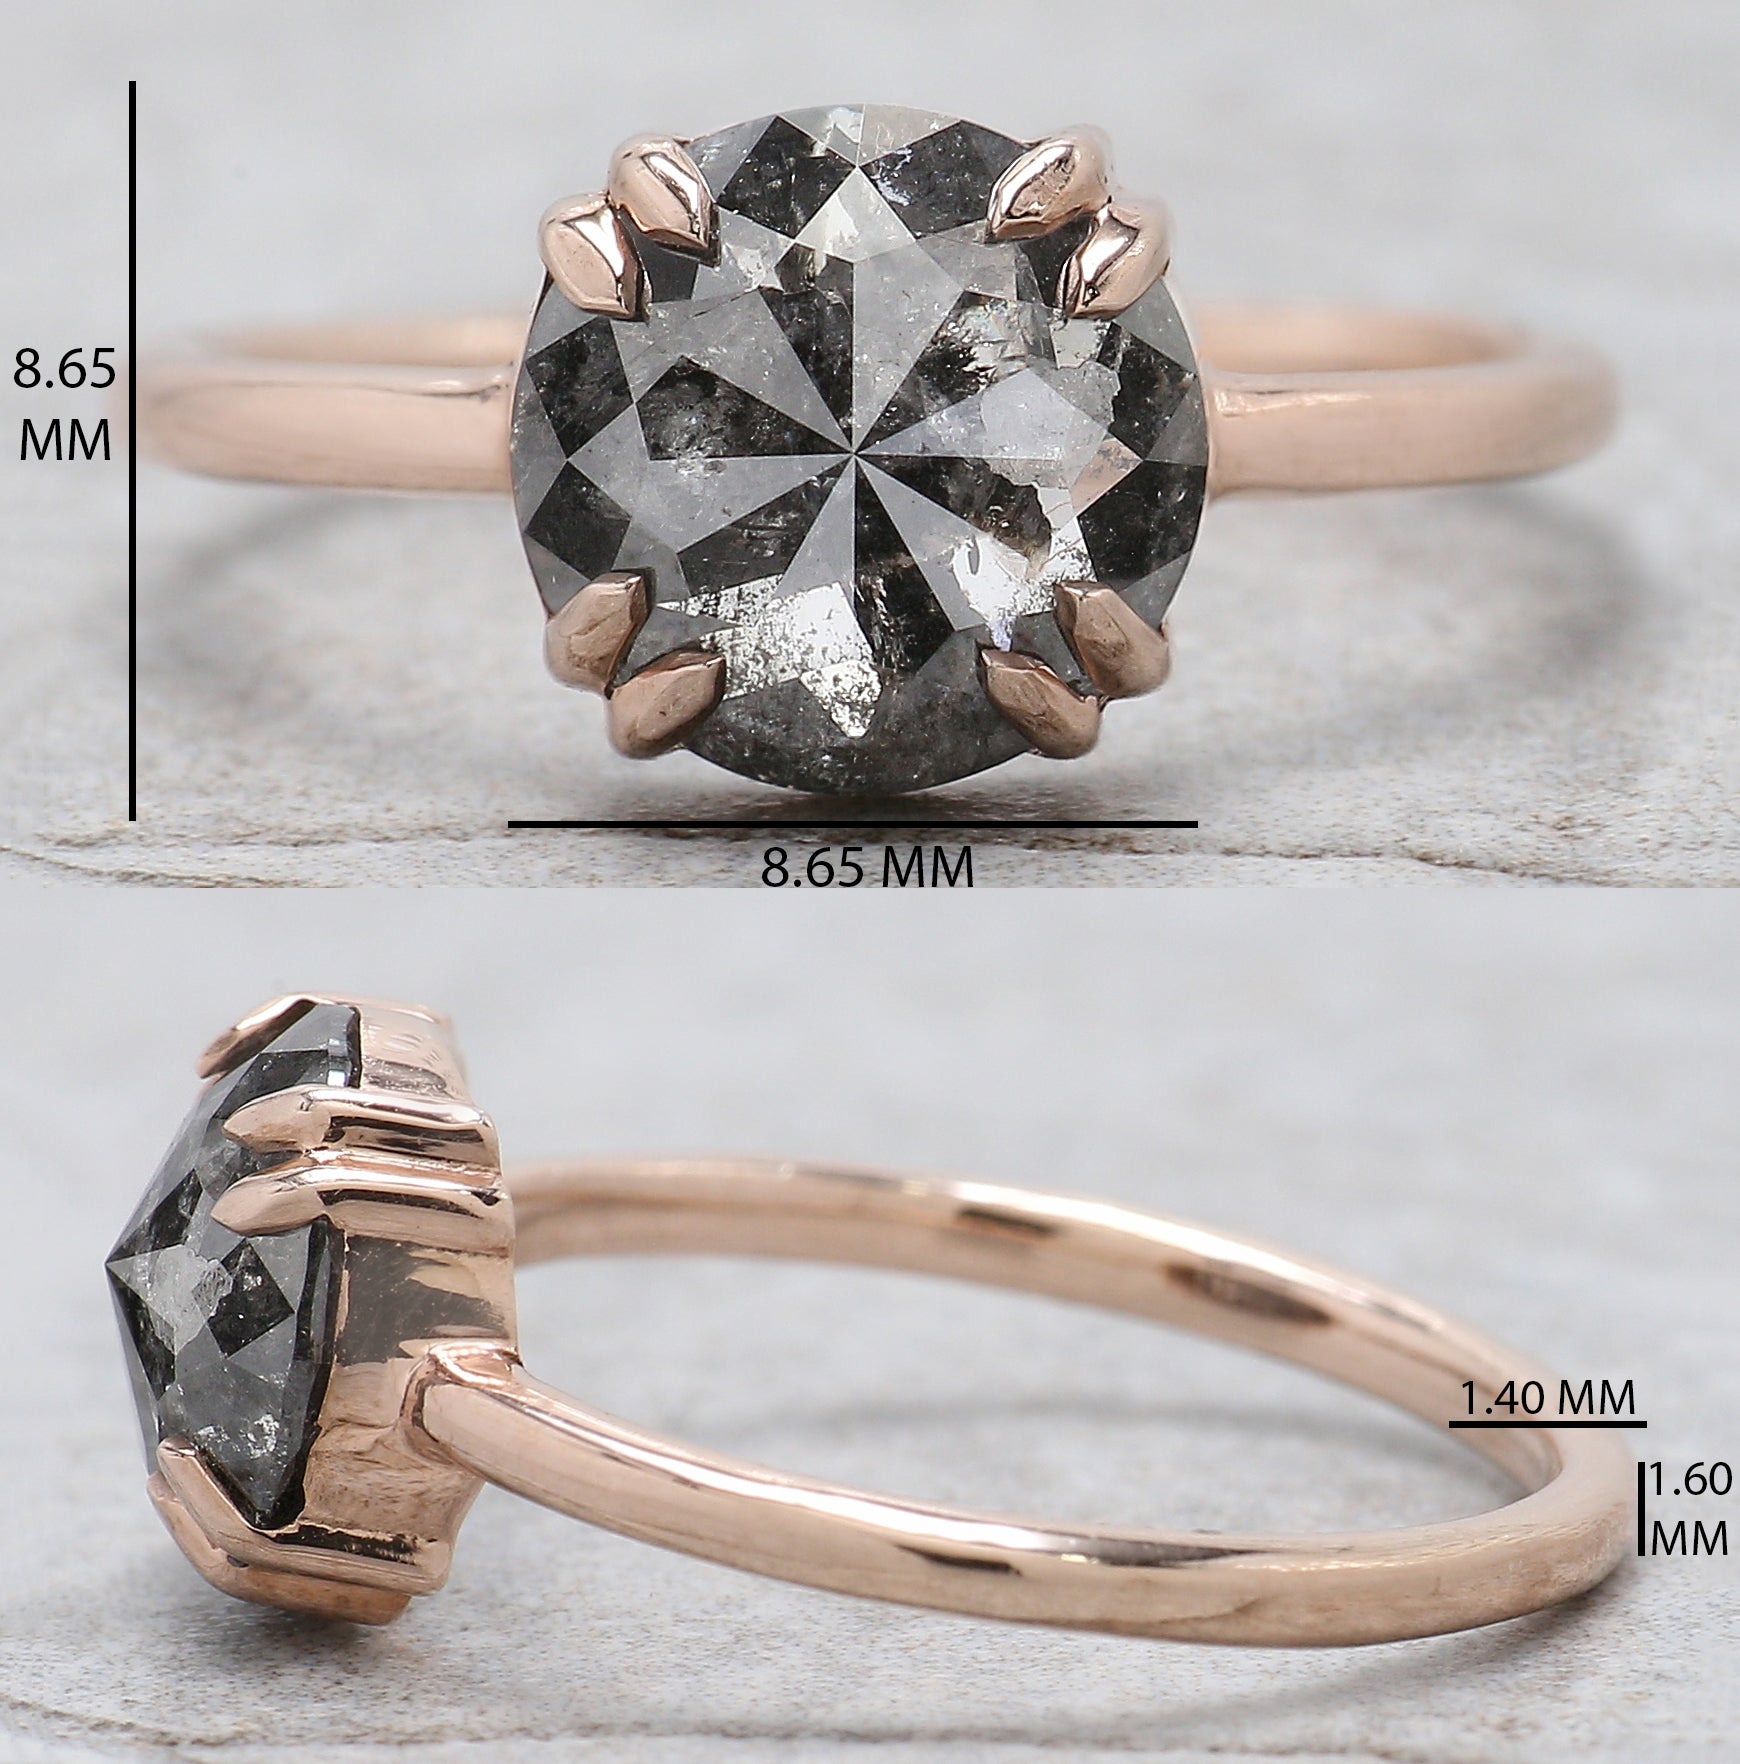 Round Rose Cut Salt And Pepper Diamond Ring 2.32 Ct 8.54 MM Round Diamond Ring 14K Rose Gold Silver Engagement Ring Gift For Her QL2435